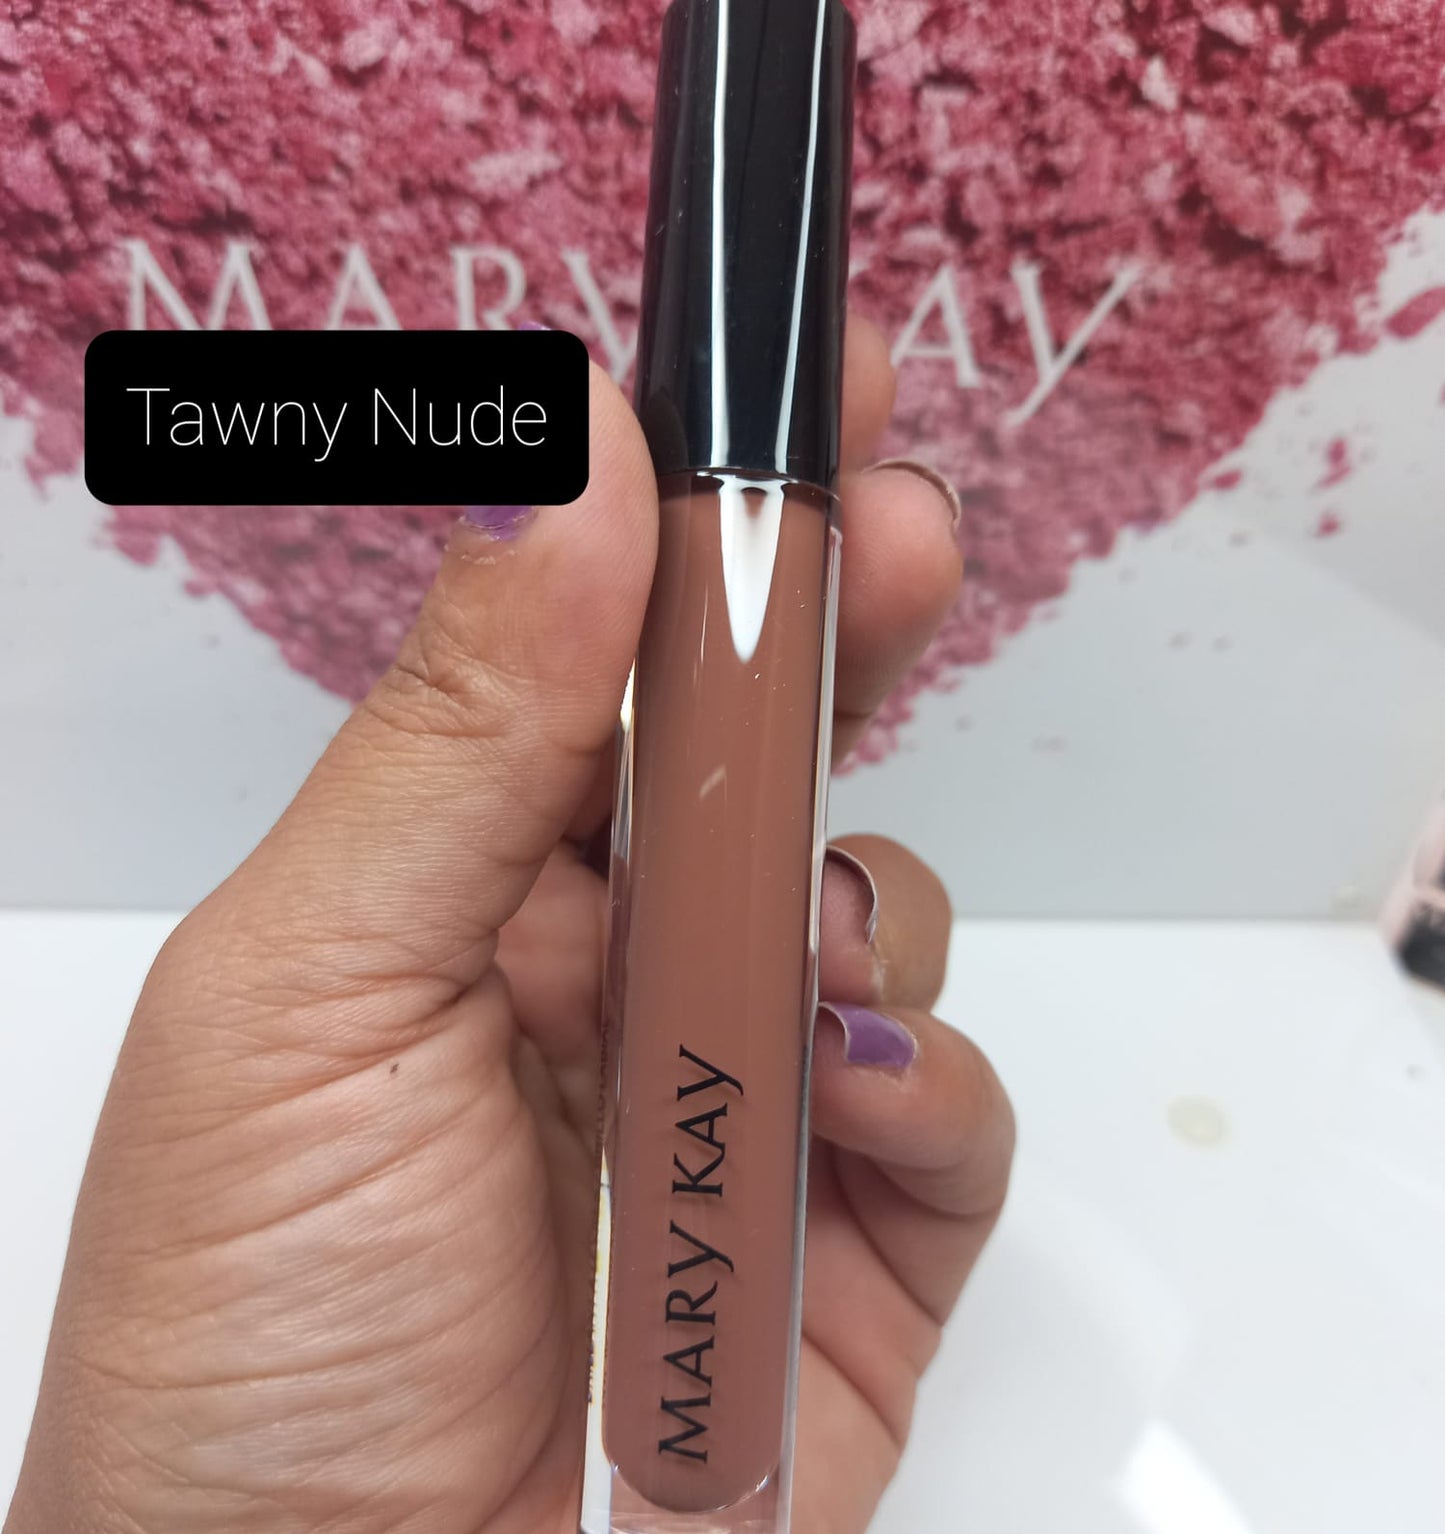 Brillo Labial Mary kay Unlimited Color Tawny Nude